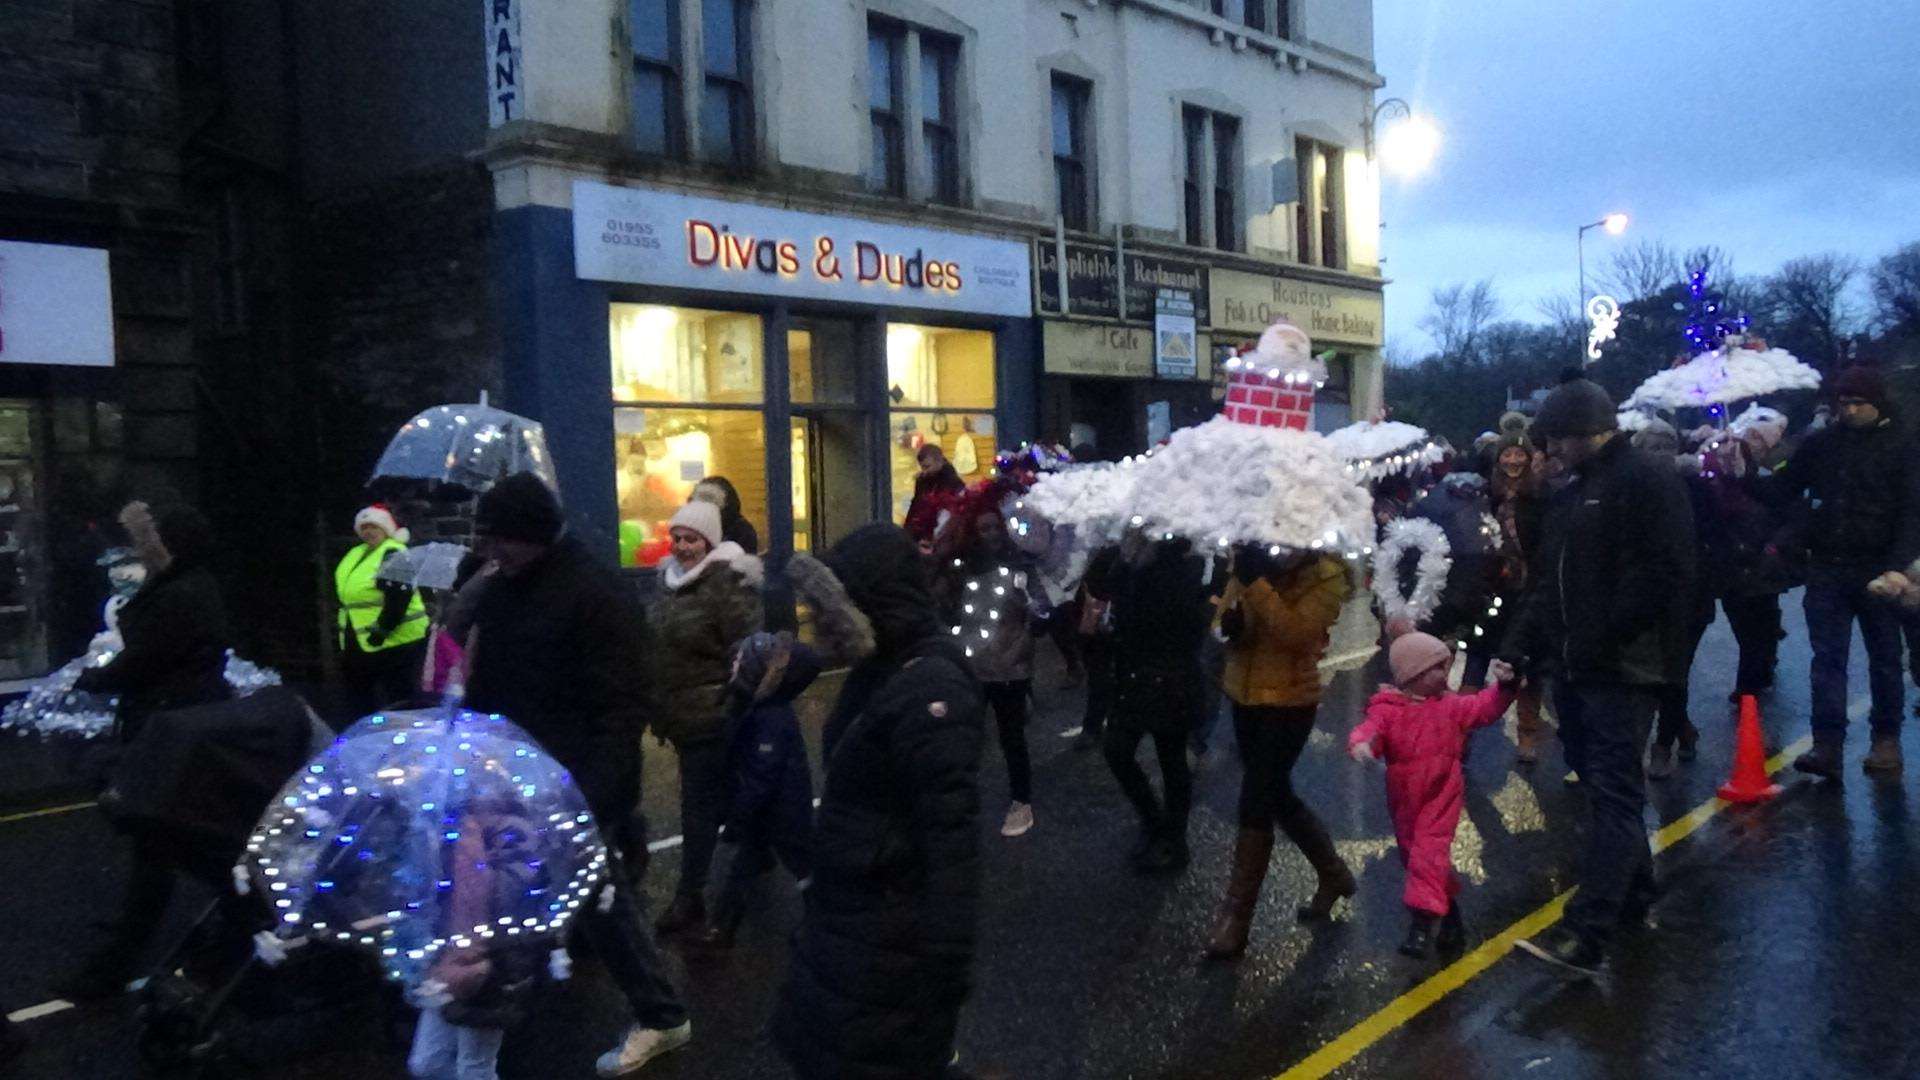 The popular umbrella parade marching to the town centre.